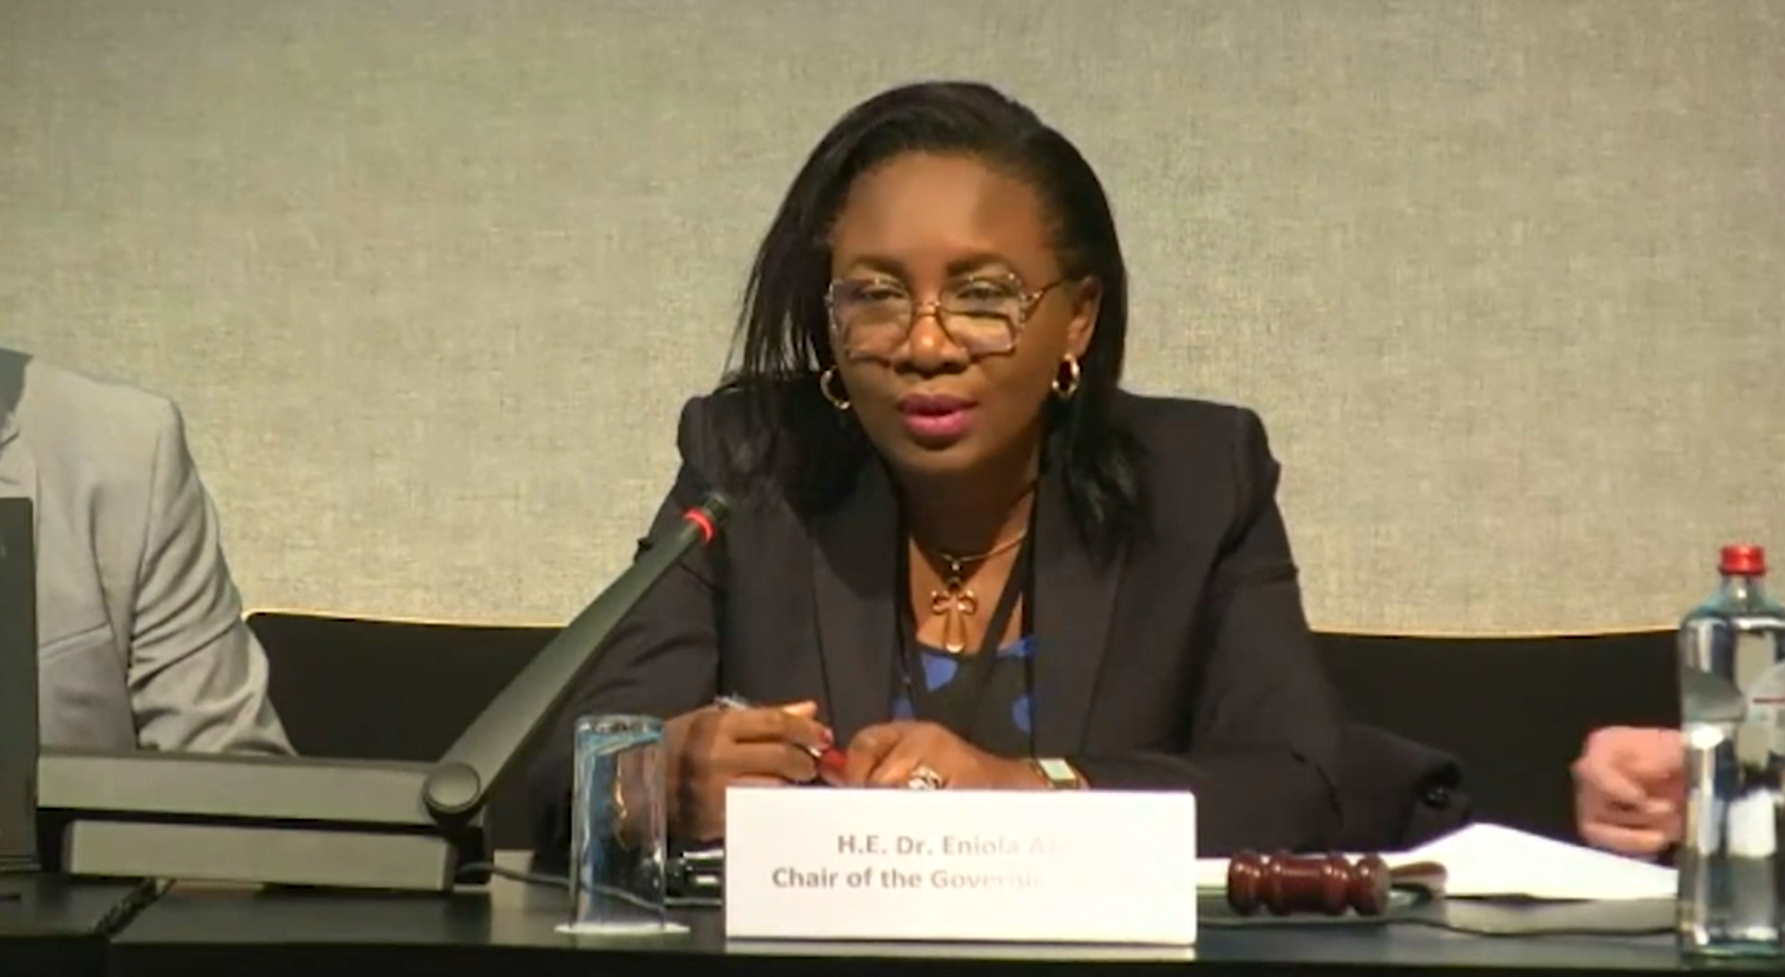 Opening Remarks by H.E. Dr. Eniola Ajayi, Chairperson of the Governing Council